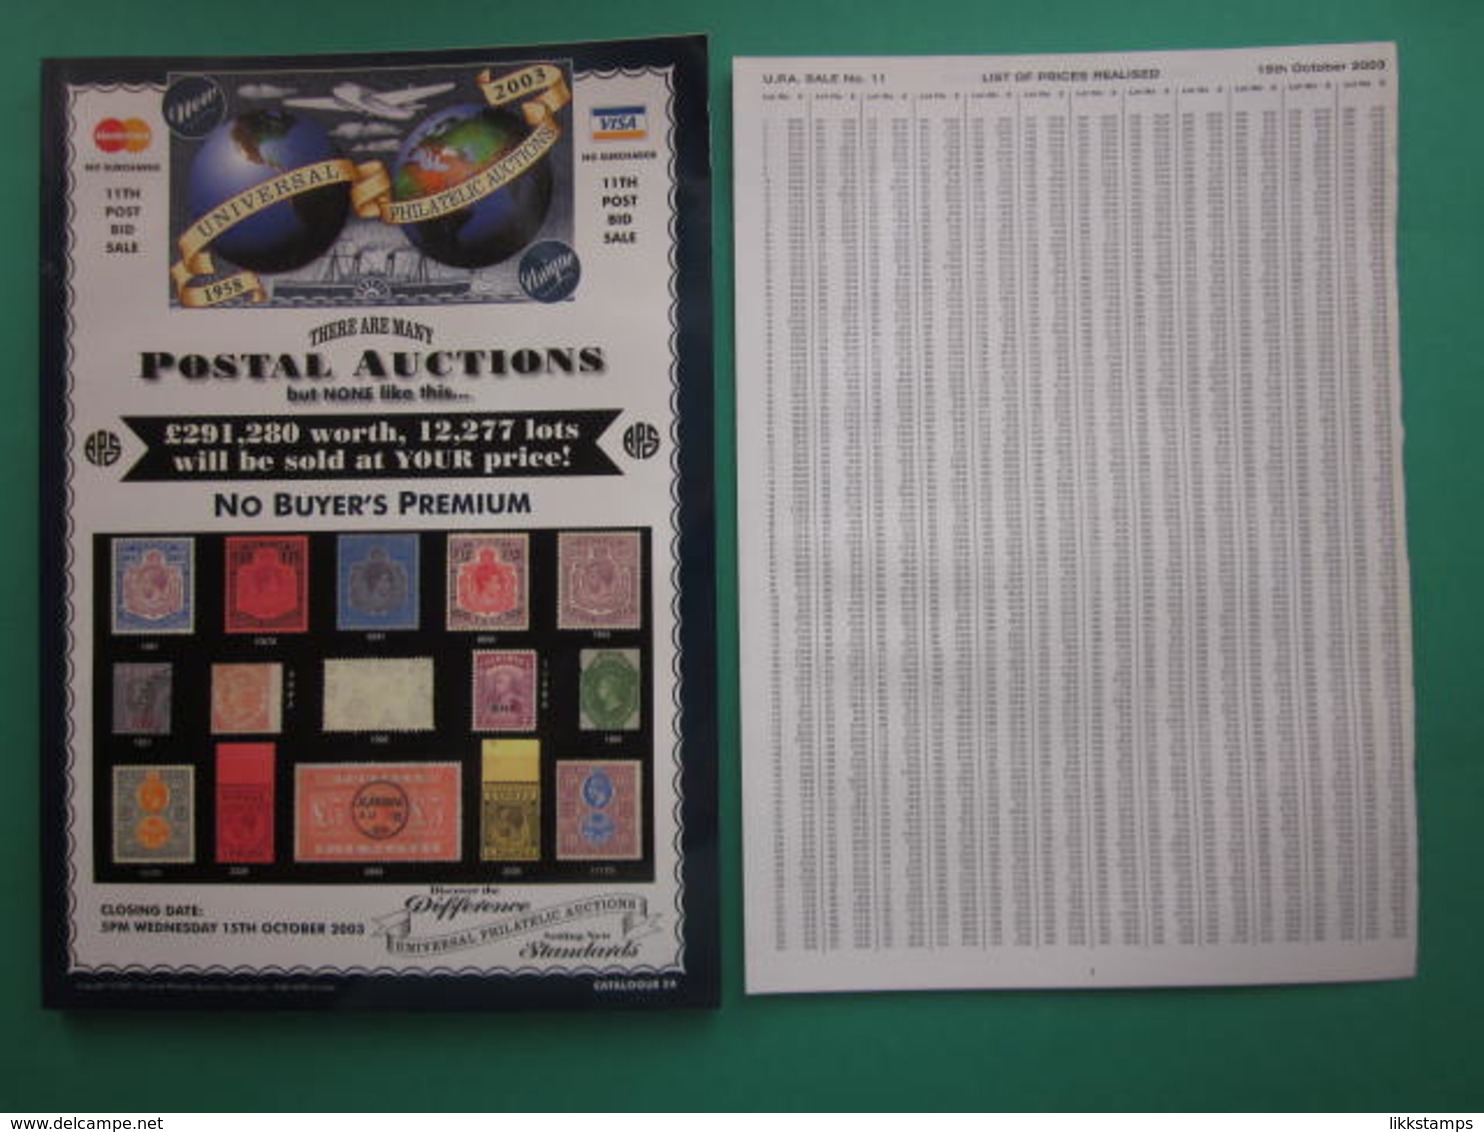 UNIVERSAL PHILATELIC AUCTIONS CATALOGUE FOR SALE No.11 On WEDNESDAY 15th OCTOBER 2003 #L0167 - Catalogues For Auction Houses